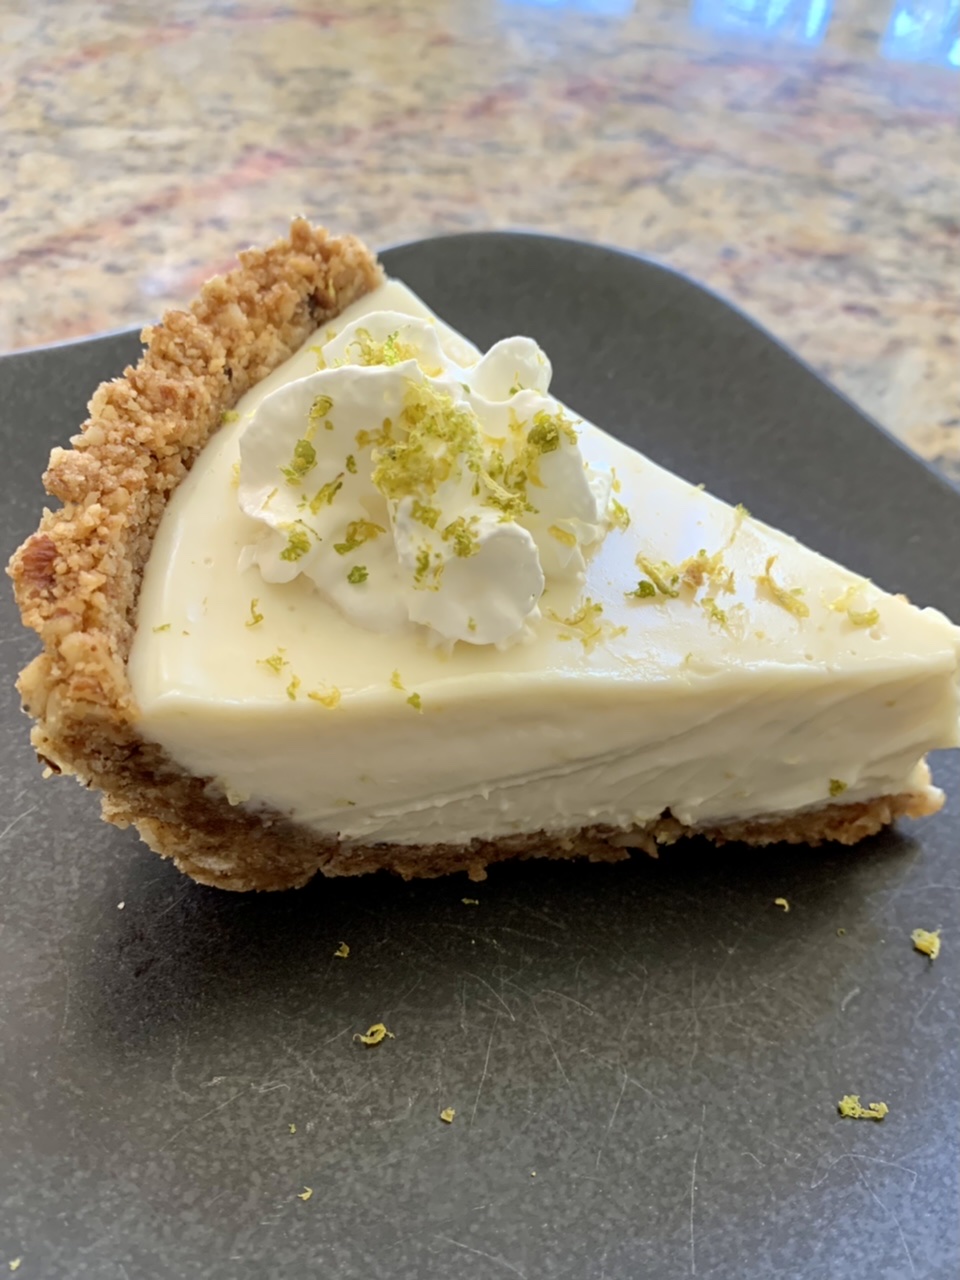 How to Make Key Lime Pie with Nut Crust